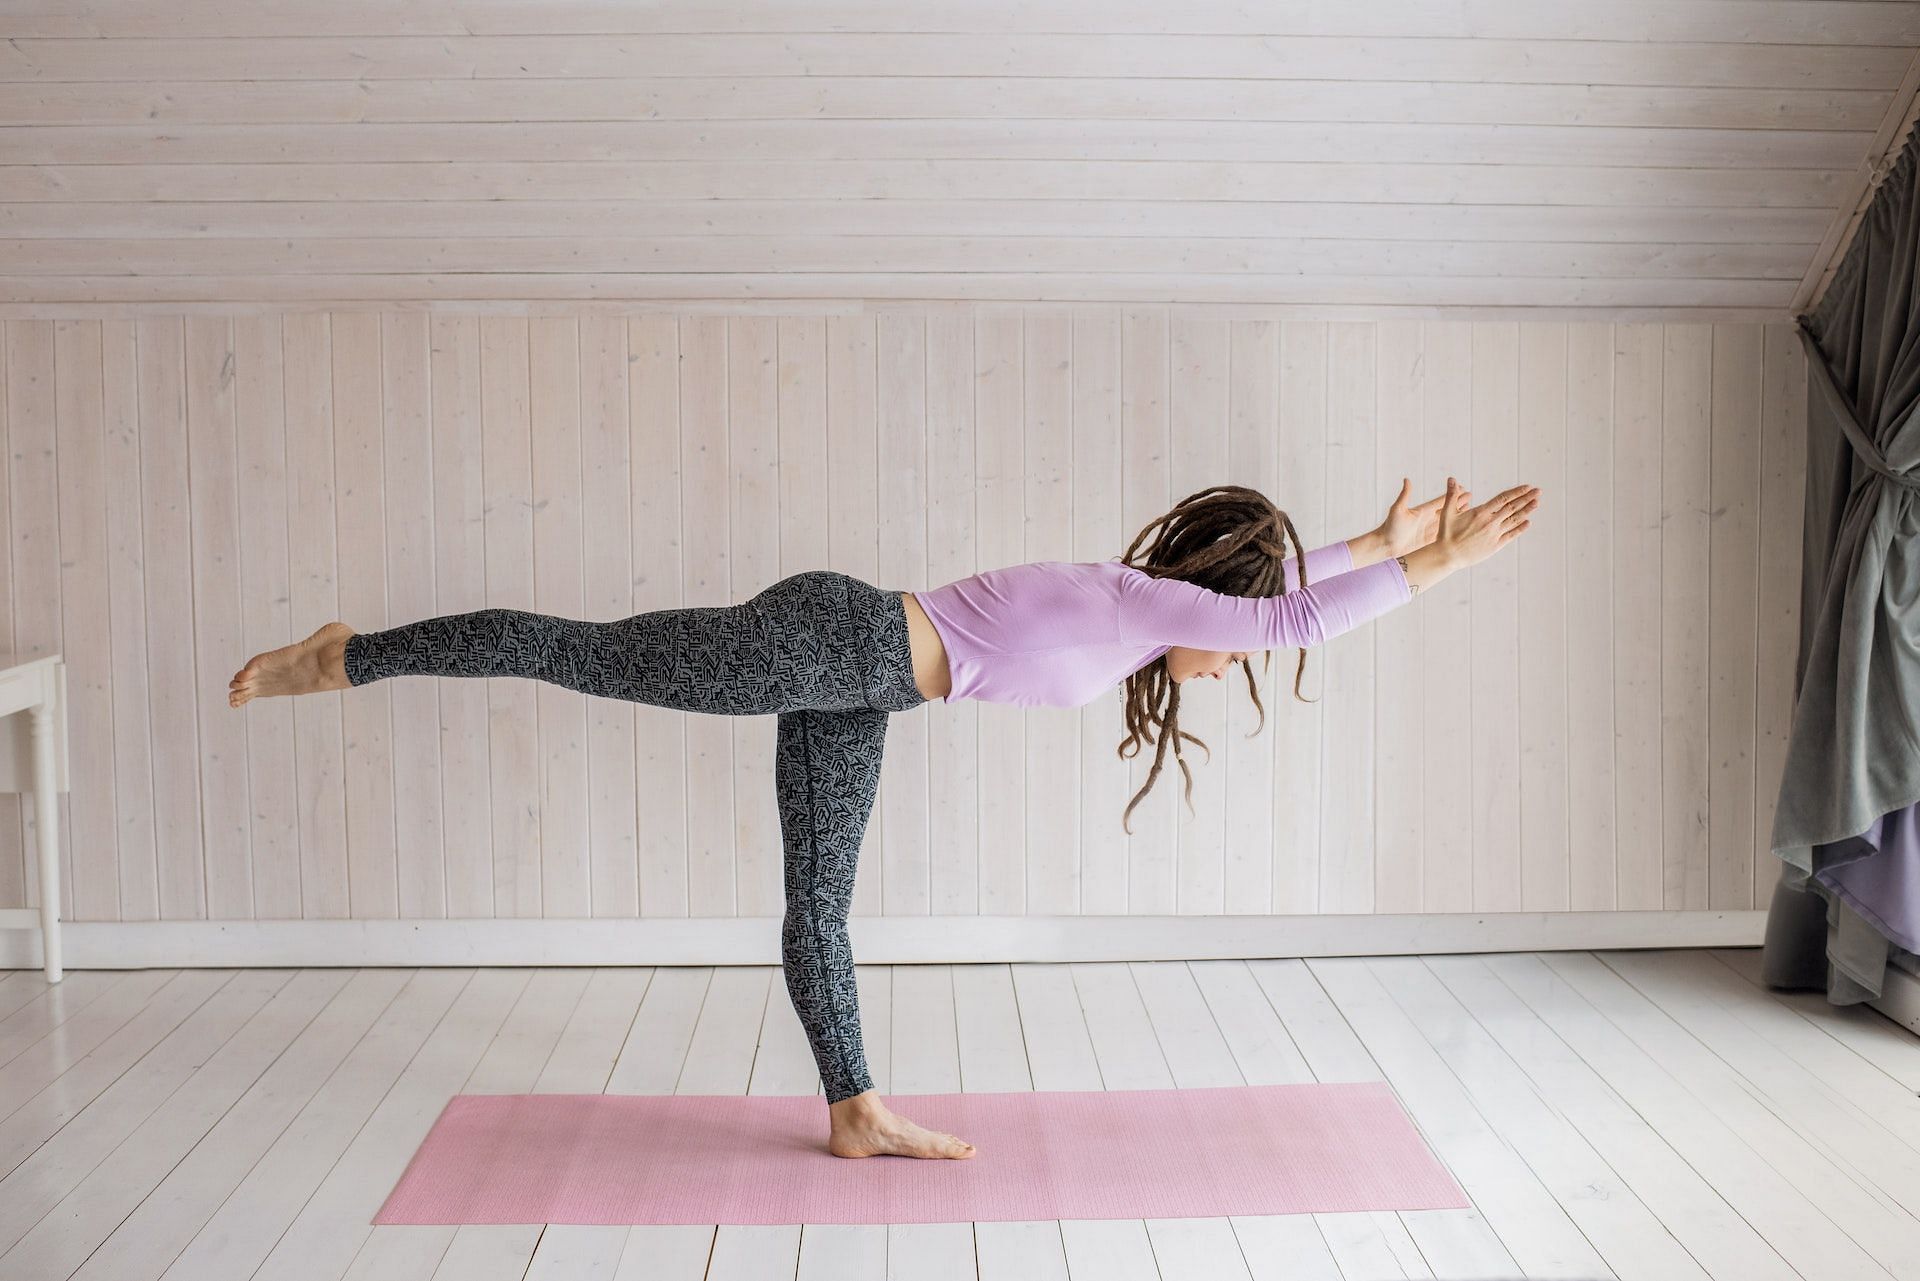 Stretching yoga for beginners can ease stiff muscles. (Photo via Pexels/Alexy Almond)